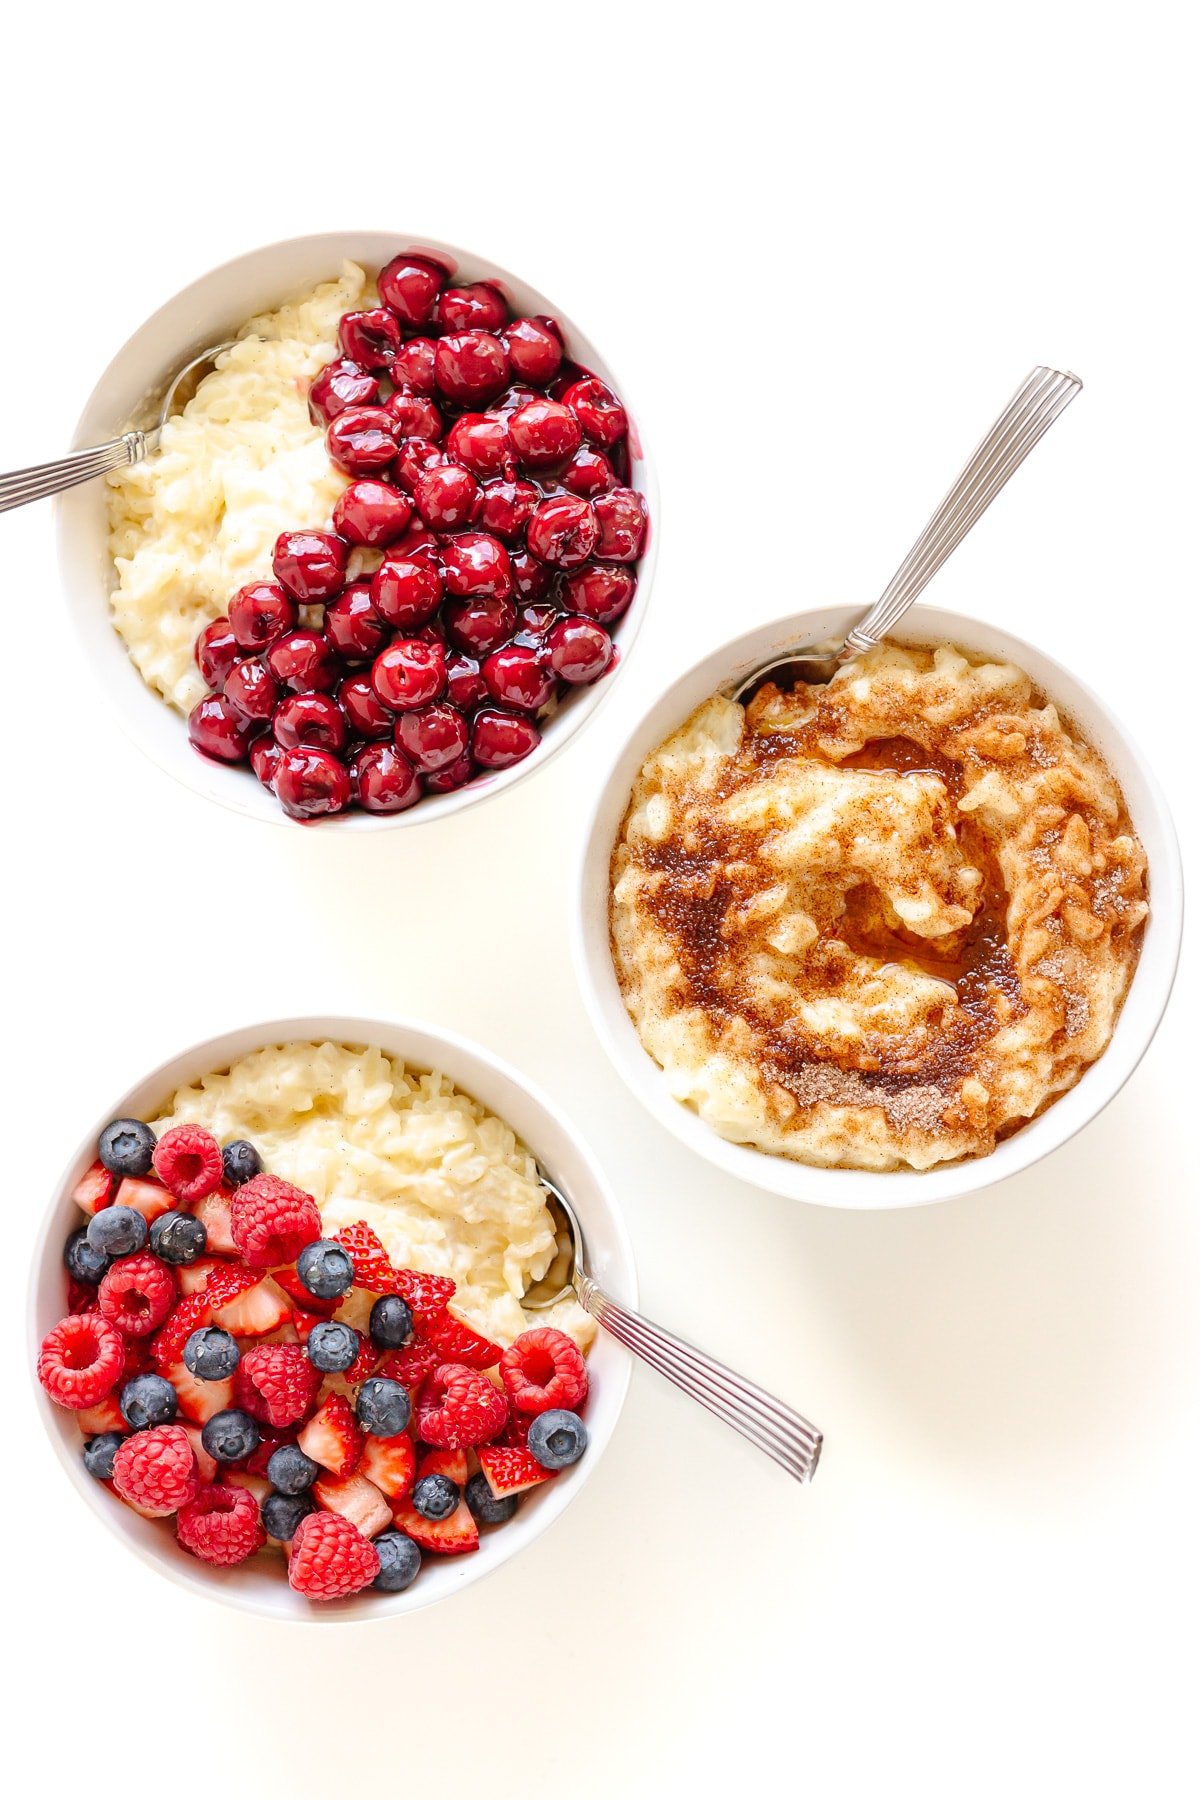 Three bowls of German Rice Pudding with different toppings displayed on a white background.